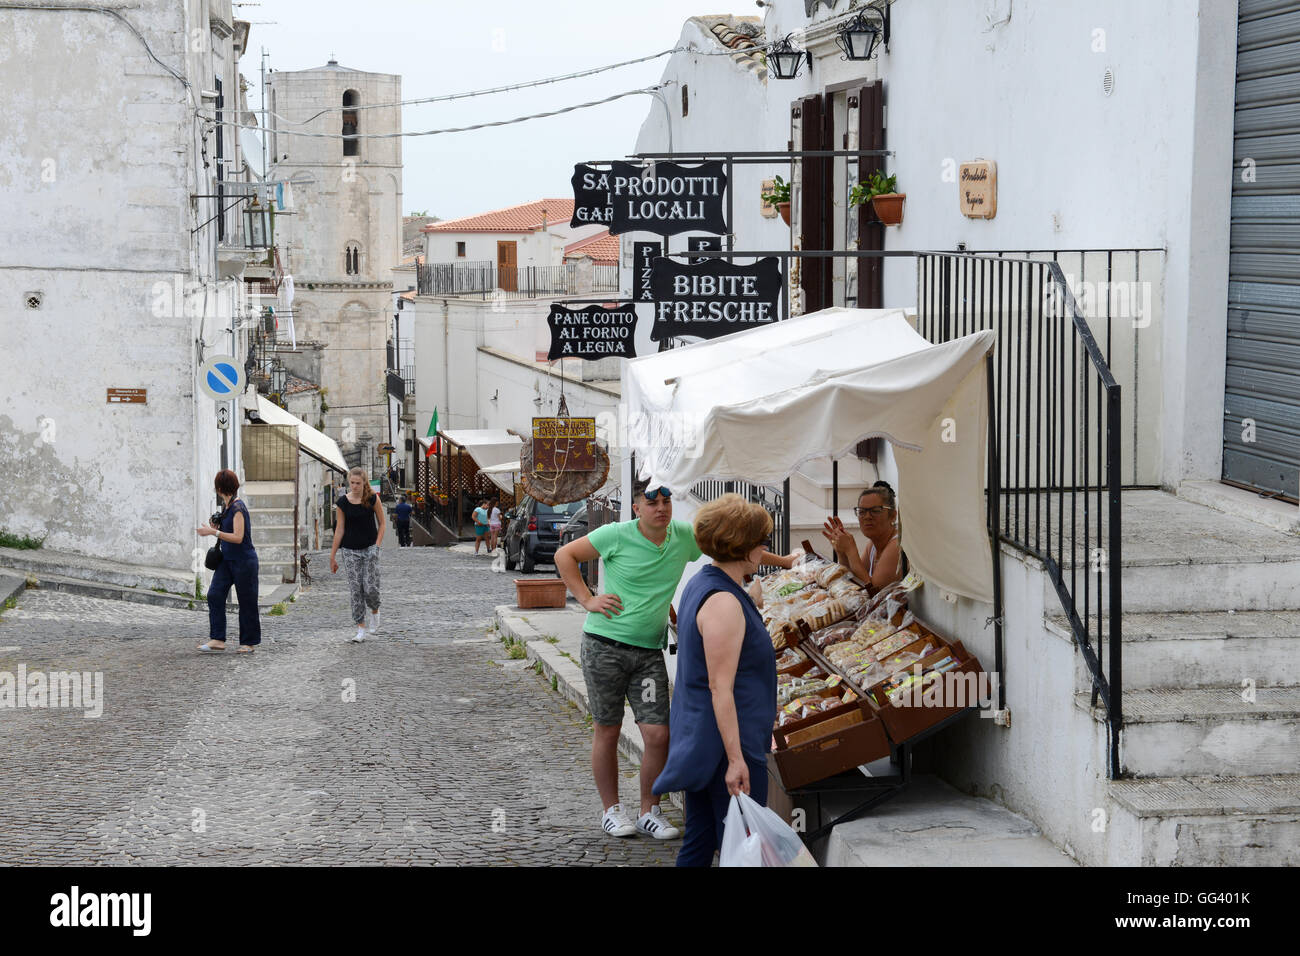 Monte Sant'Angelo, Italy - 28 June 2016: people shopping on the tourist shops of Monte Sant'Angelo on Puglia, Italy. Stock Photo